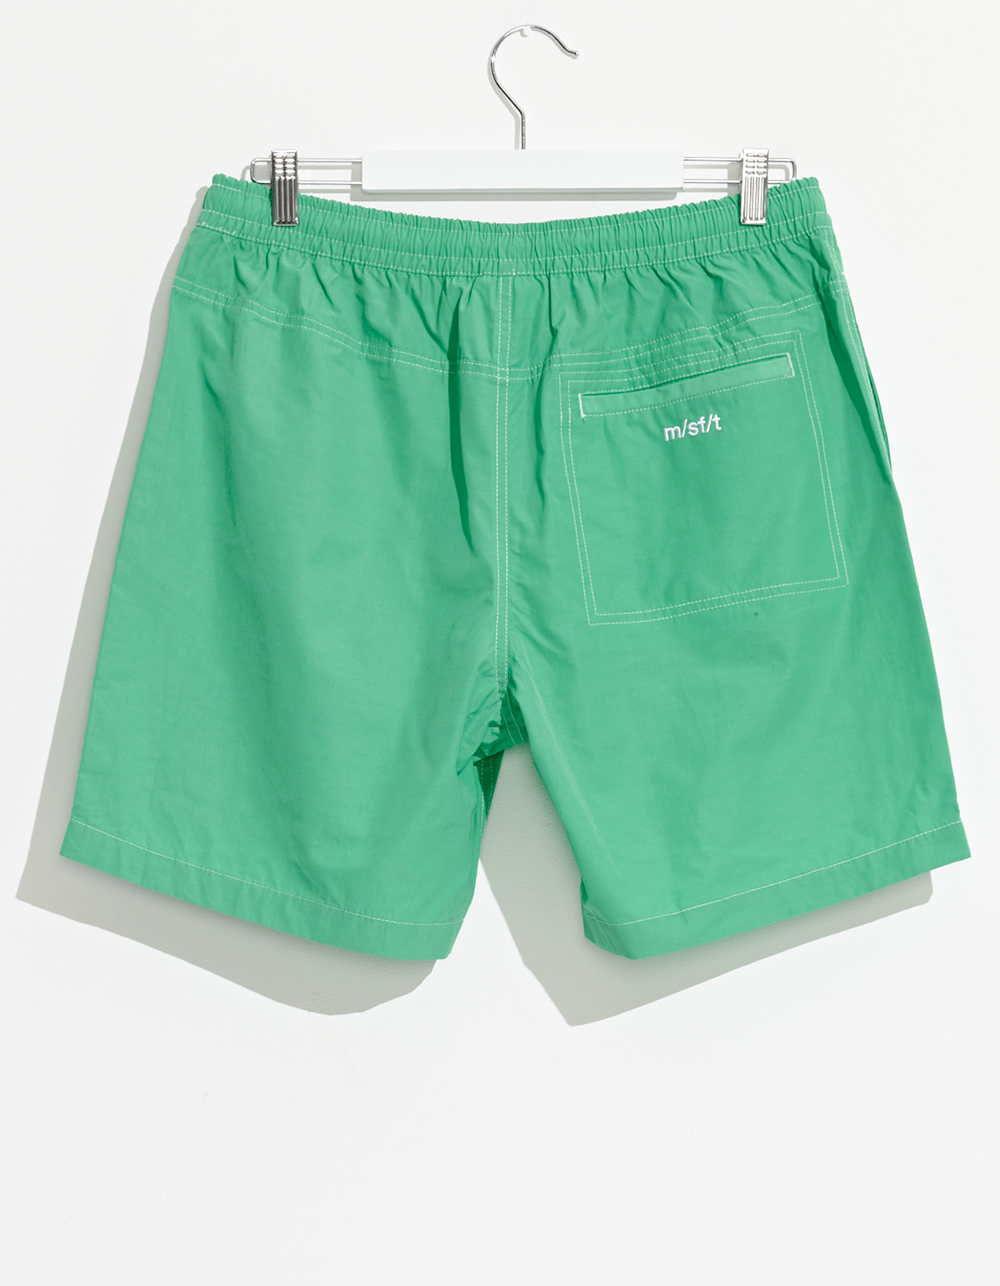 MISFIT SHAPES Recycled Canned Meta Mens Shorts - GREEN | Tillys